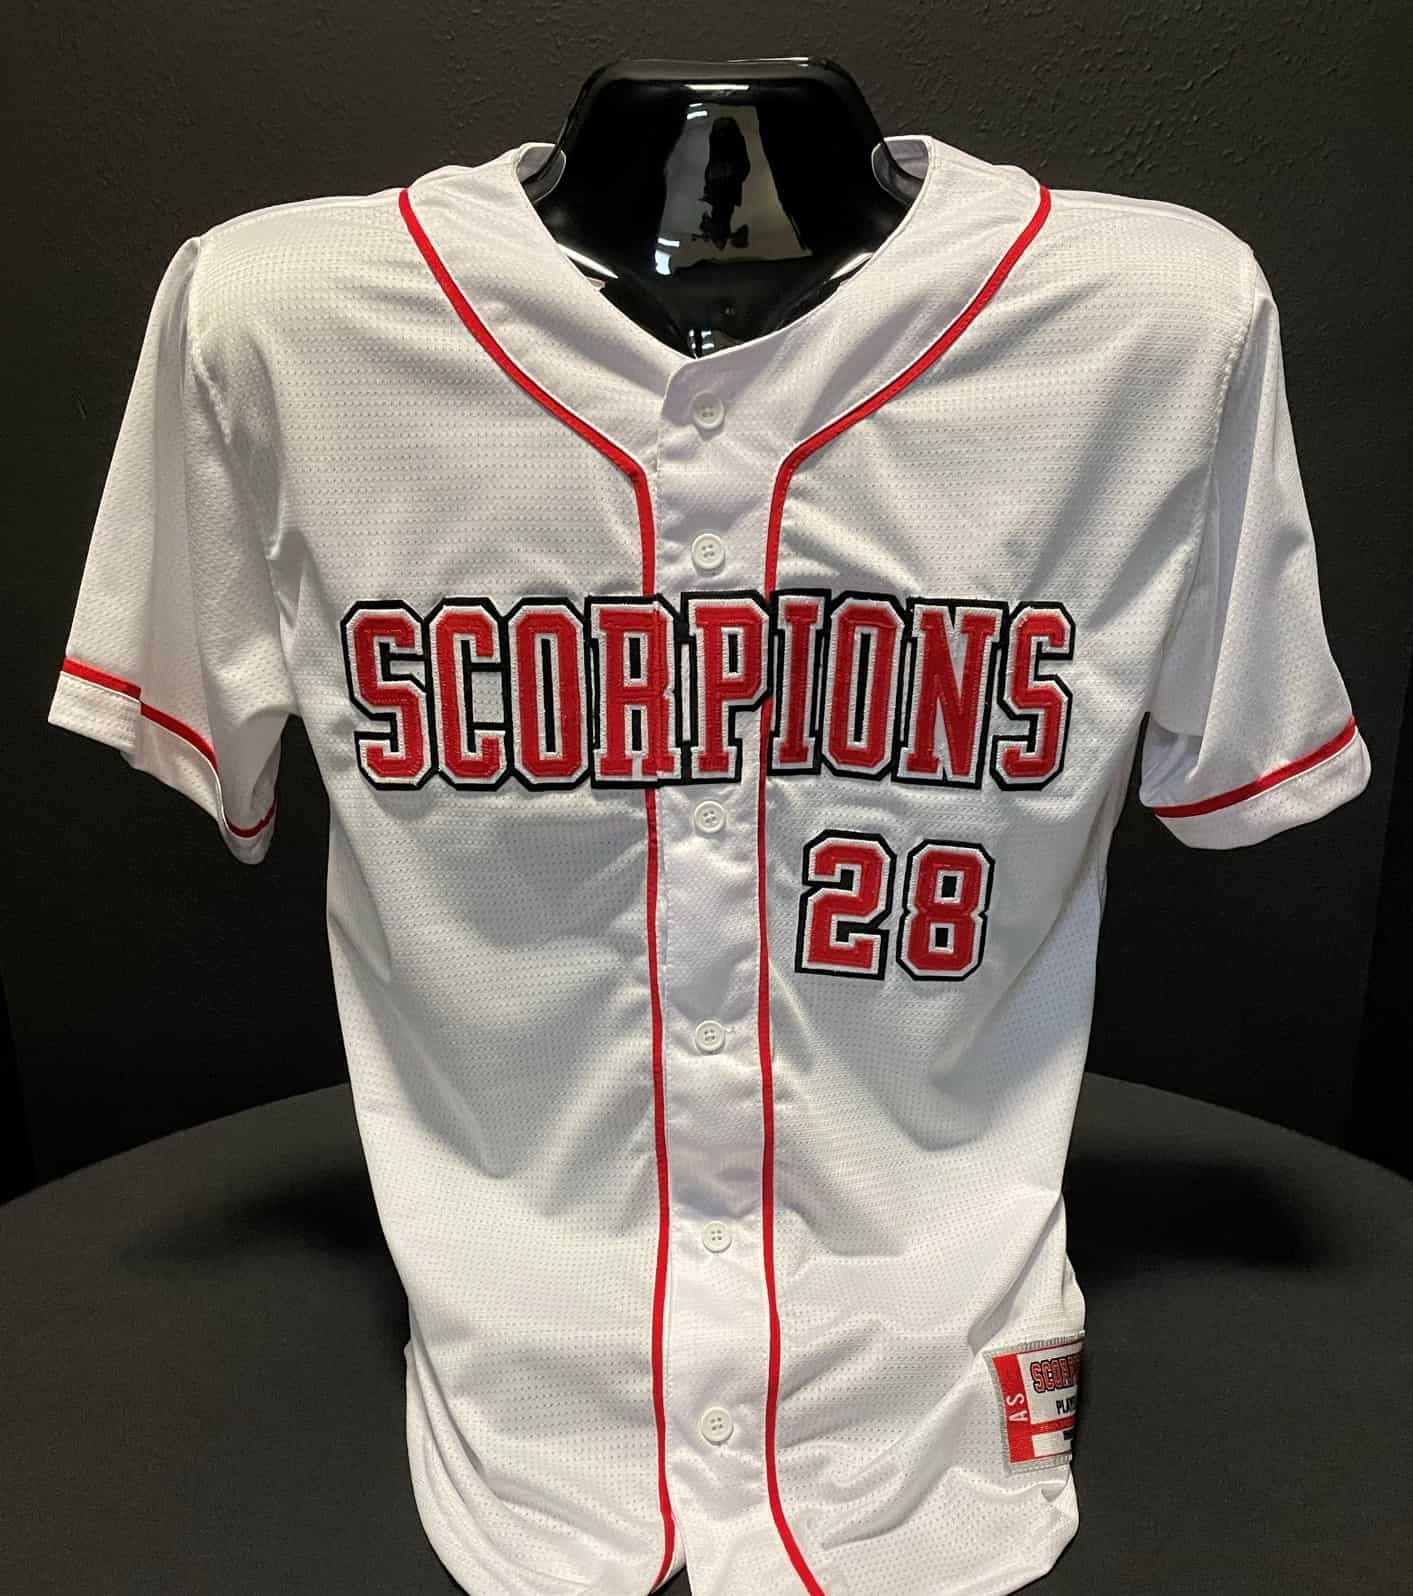 Scorpions Baseball custom jersey created at Dugout Sports in Spring, TX!  Create your own custom uniforms at www.garbathletics.com!